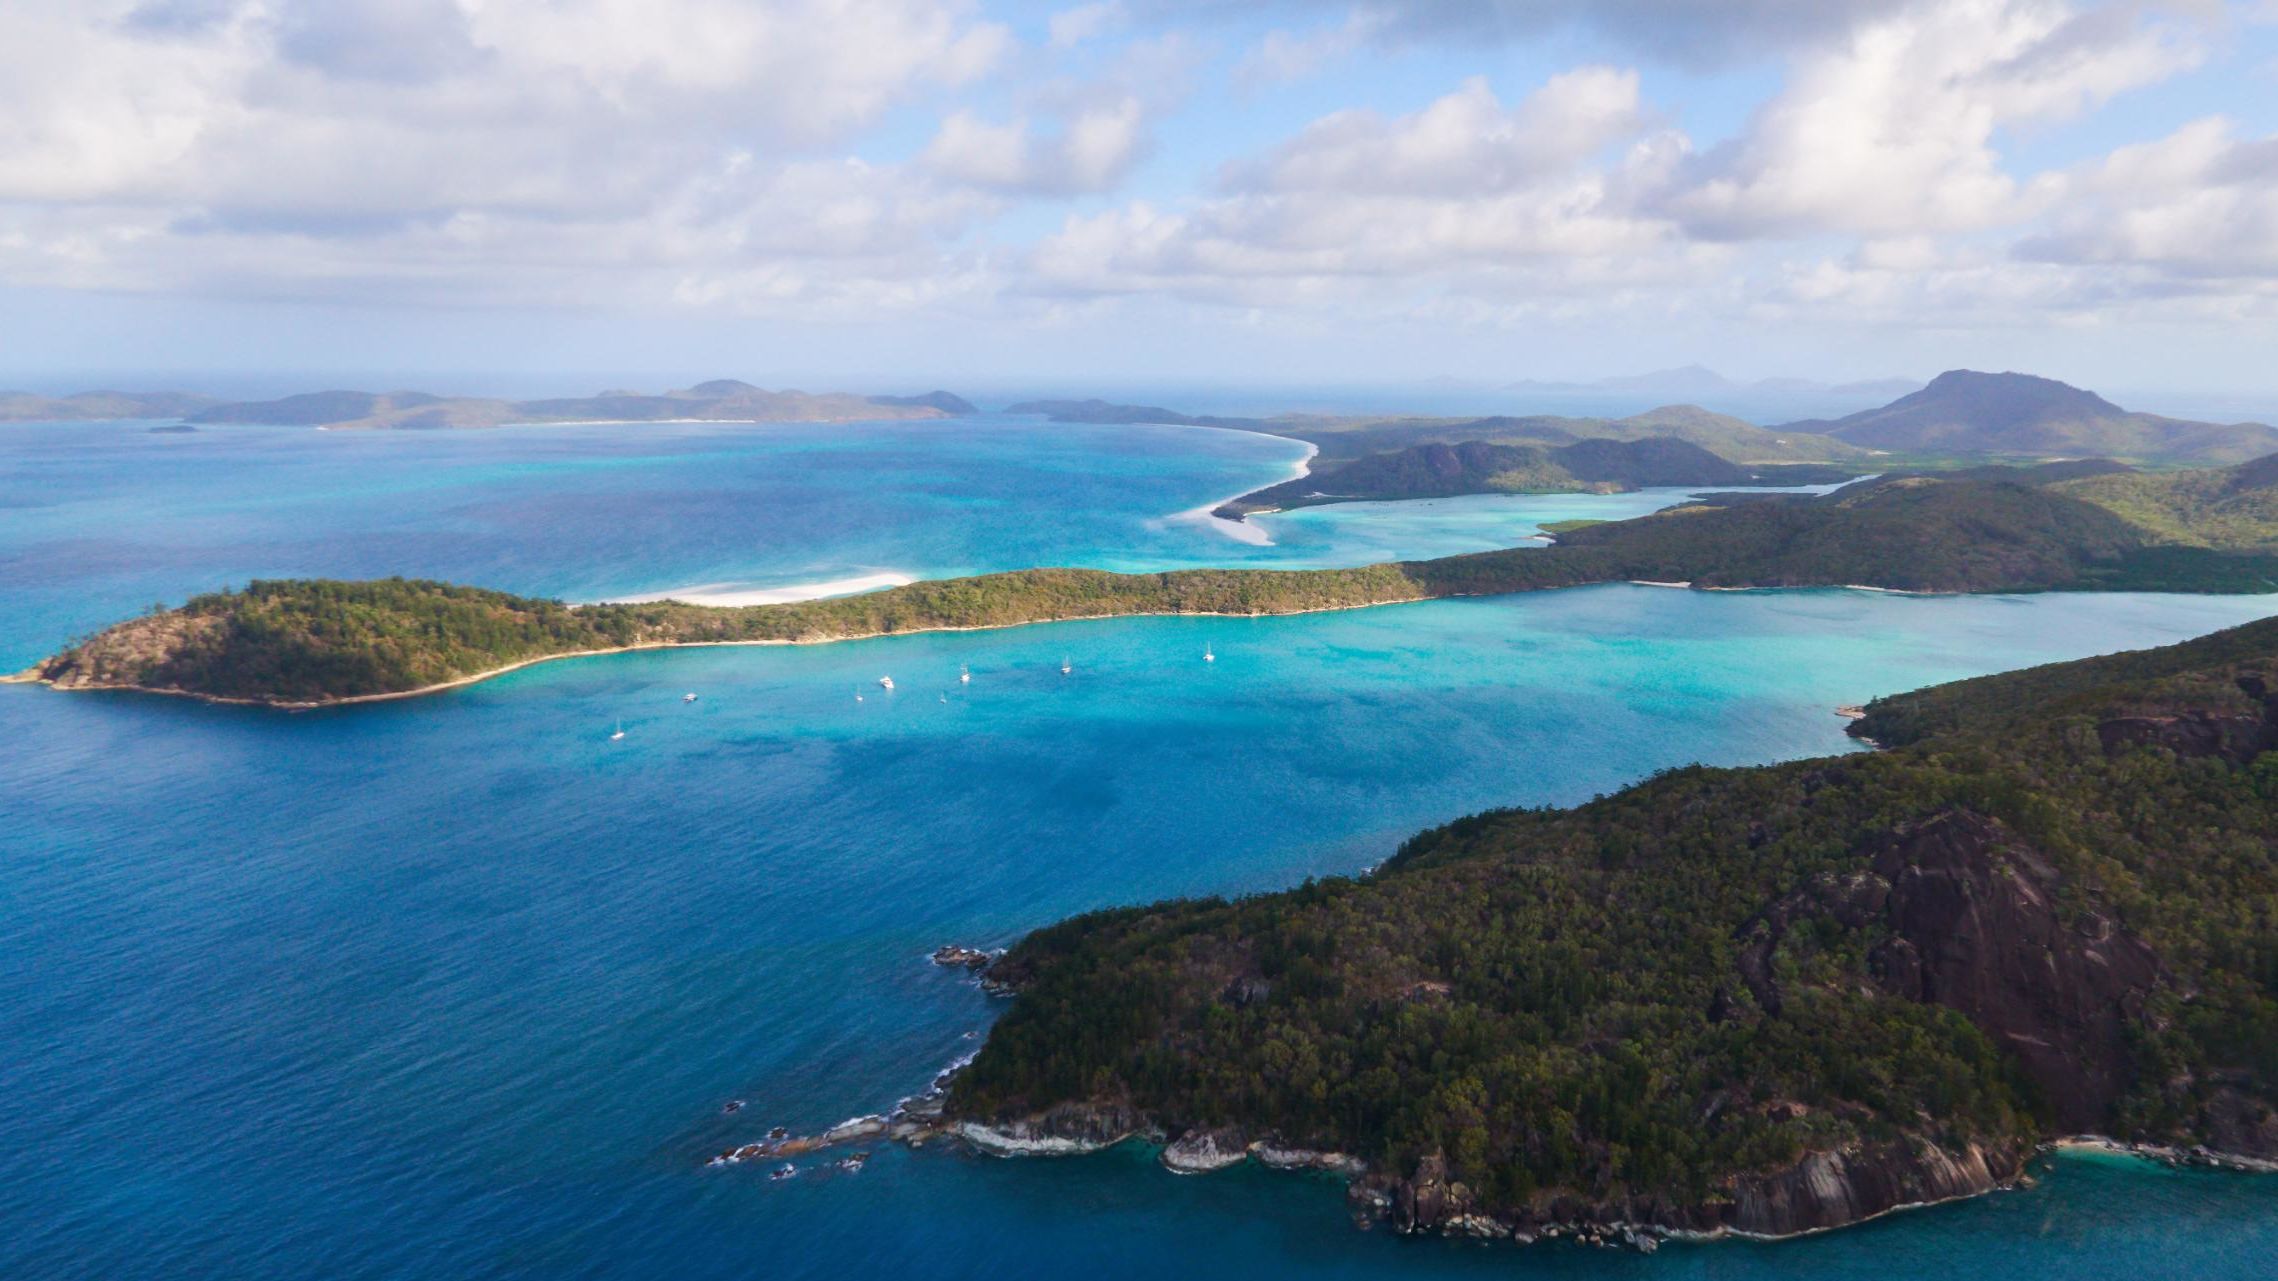 Aerial view of the Whitsunday Islands in northeastern Australia.